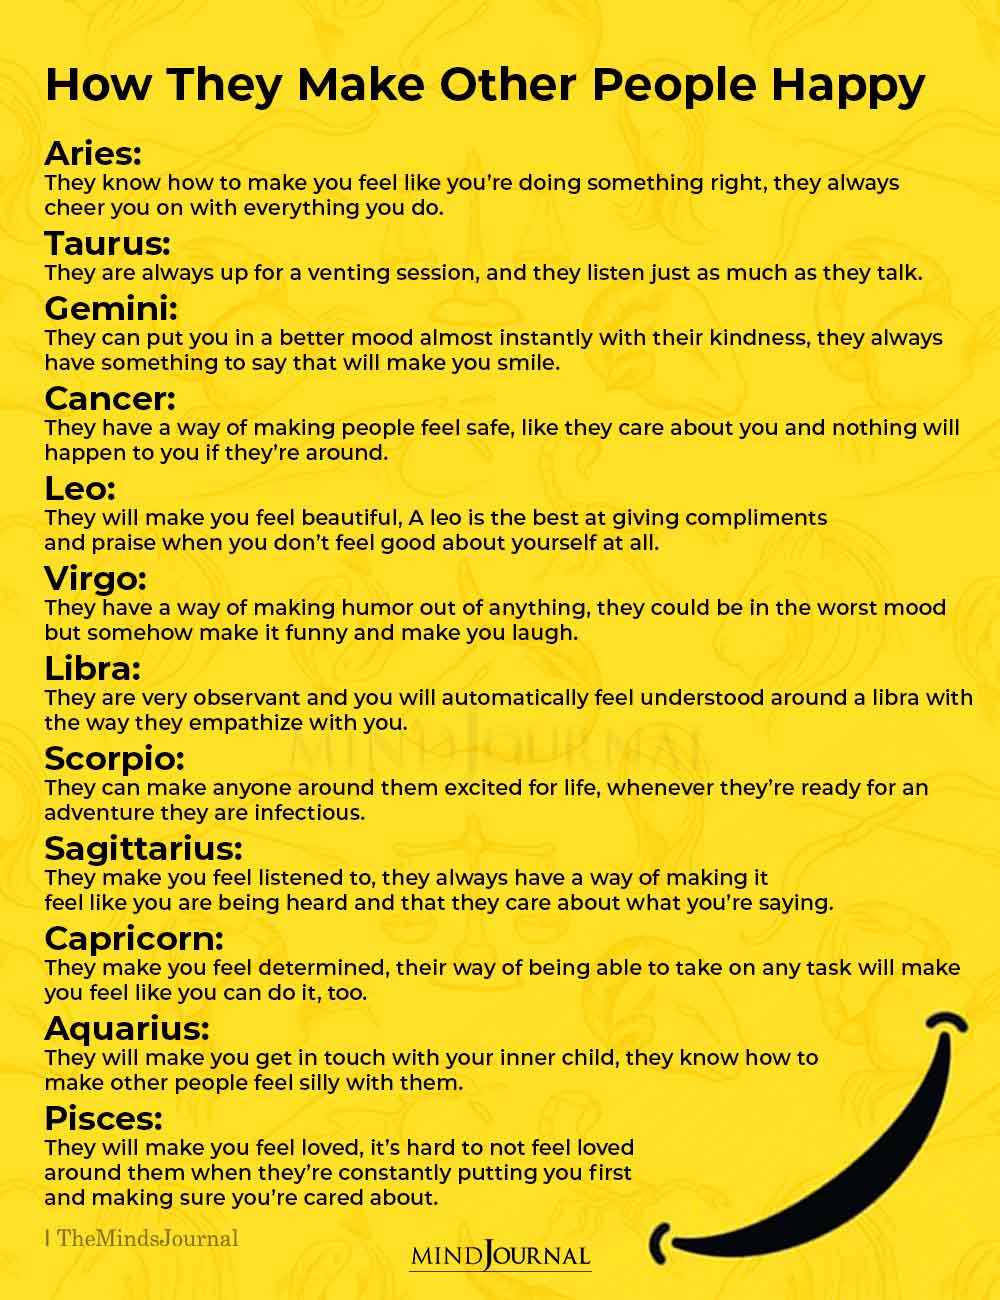 How The Zodiac Signs Make Other People Happy